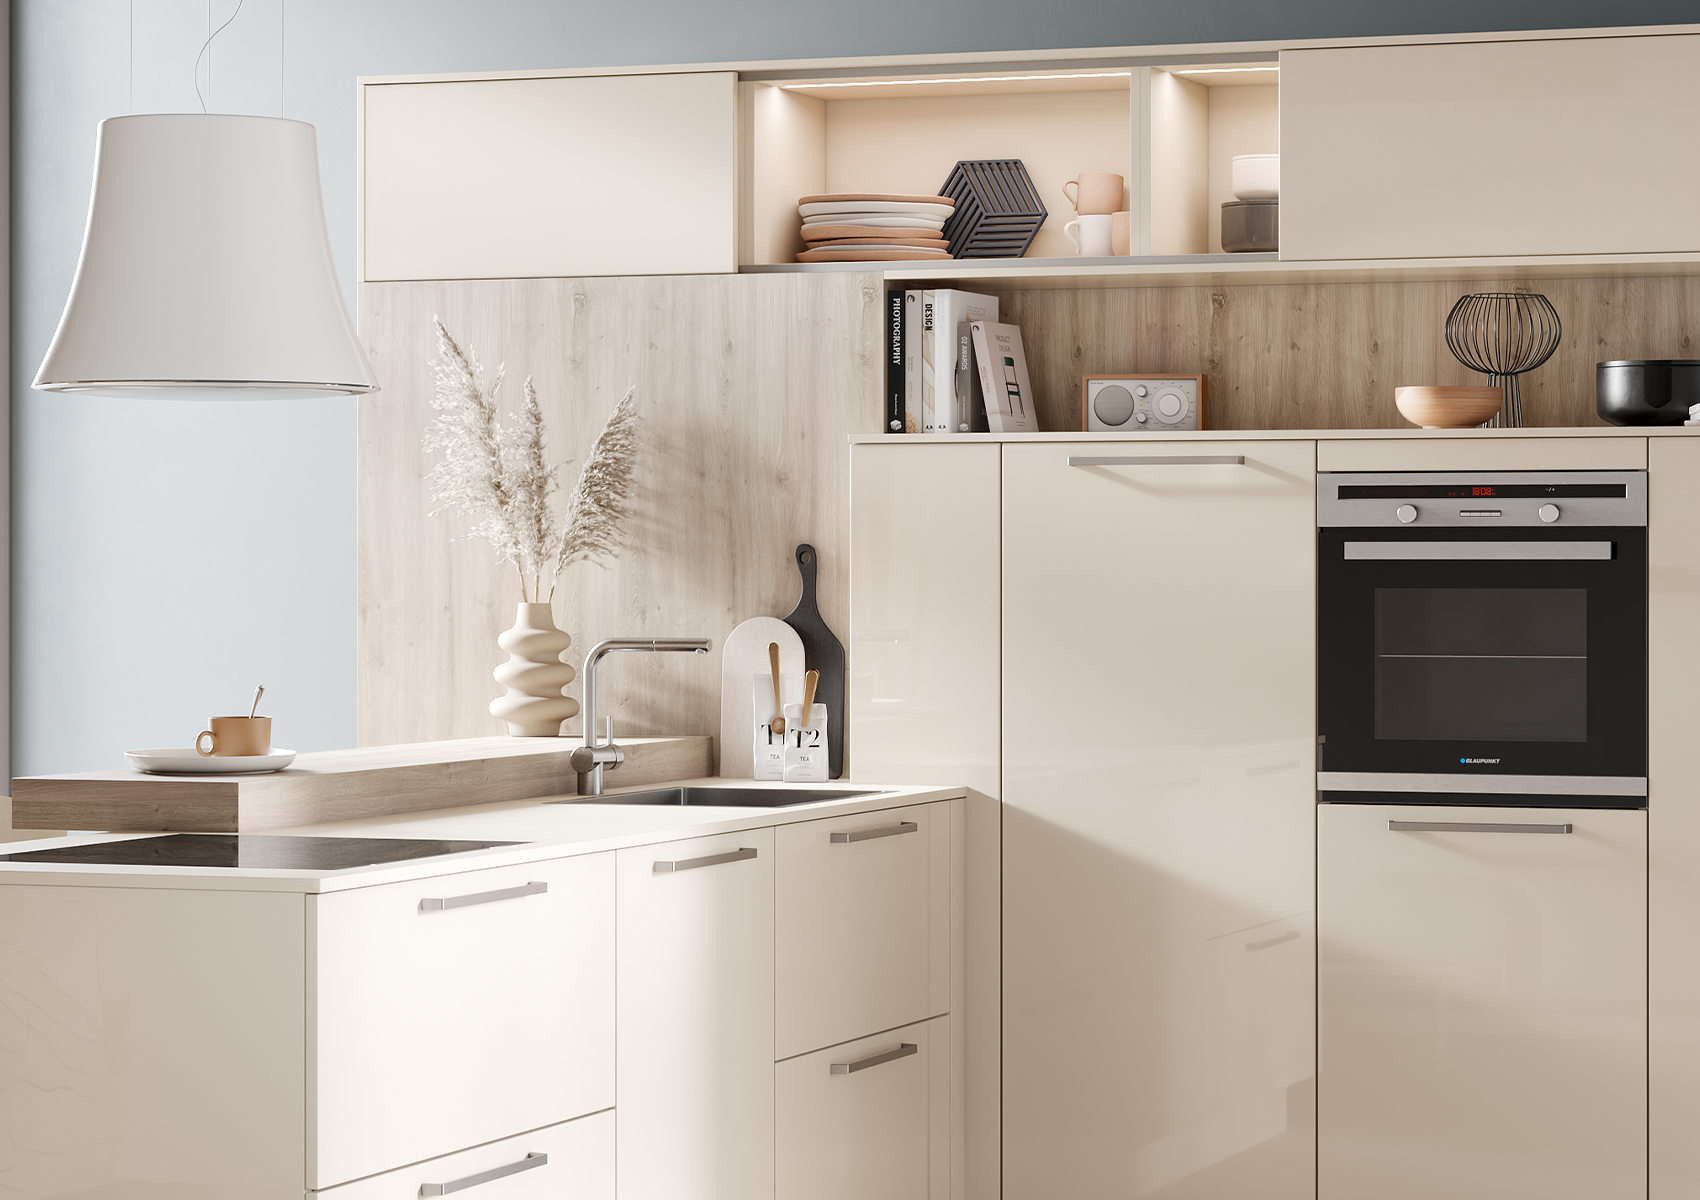 Detailed picture of kitchen arrangement across the corner, on the left pull-outs in crema magnolia with bar handles, on the right wall unit with midi larder units and built-in cooker